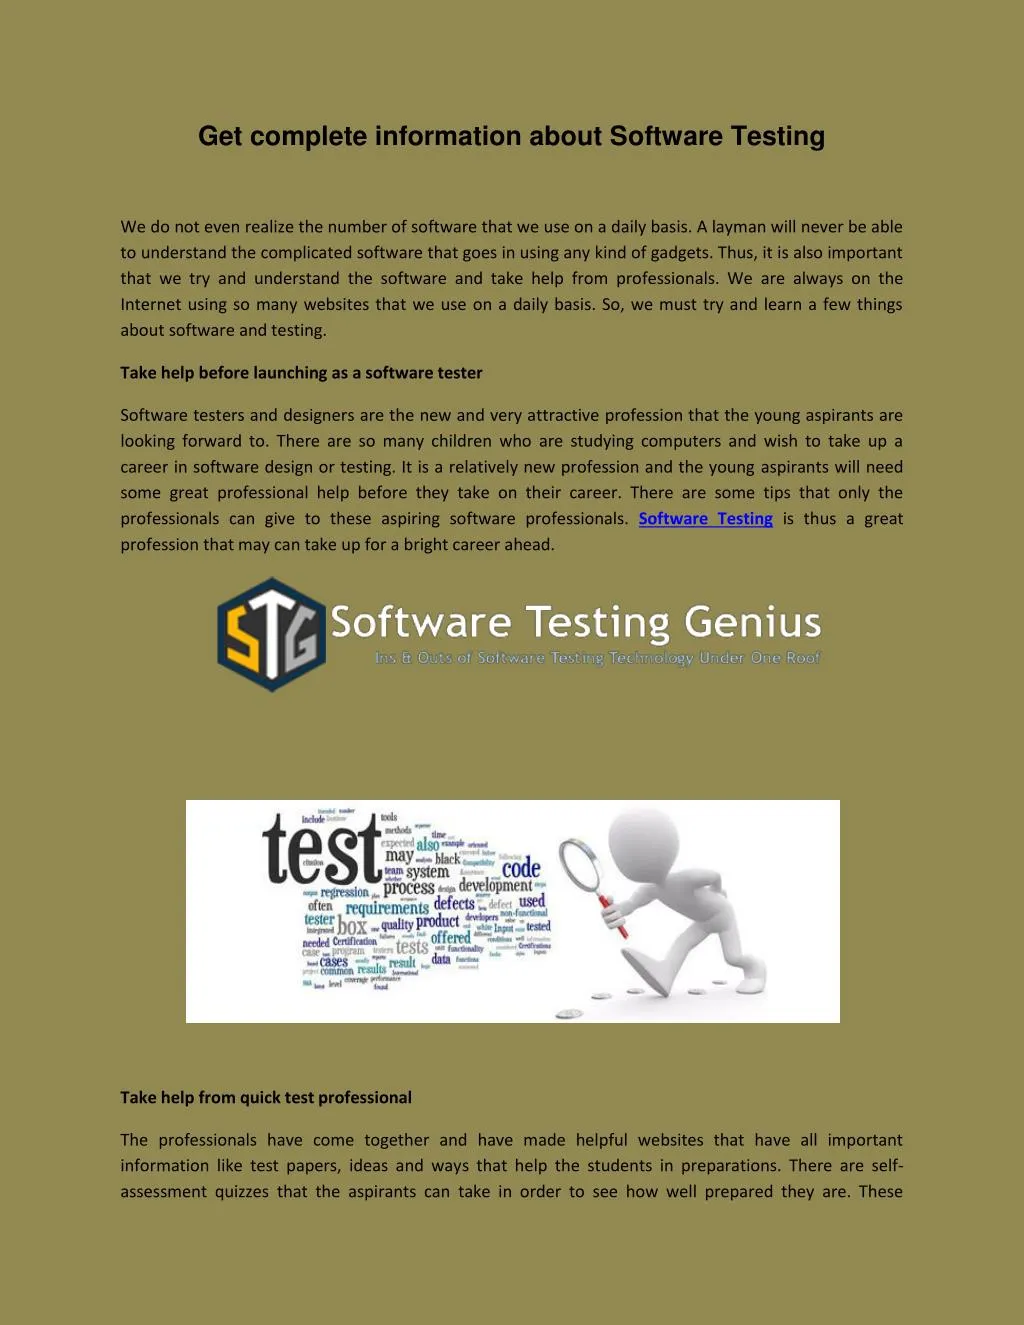 get complete information about software testing